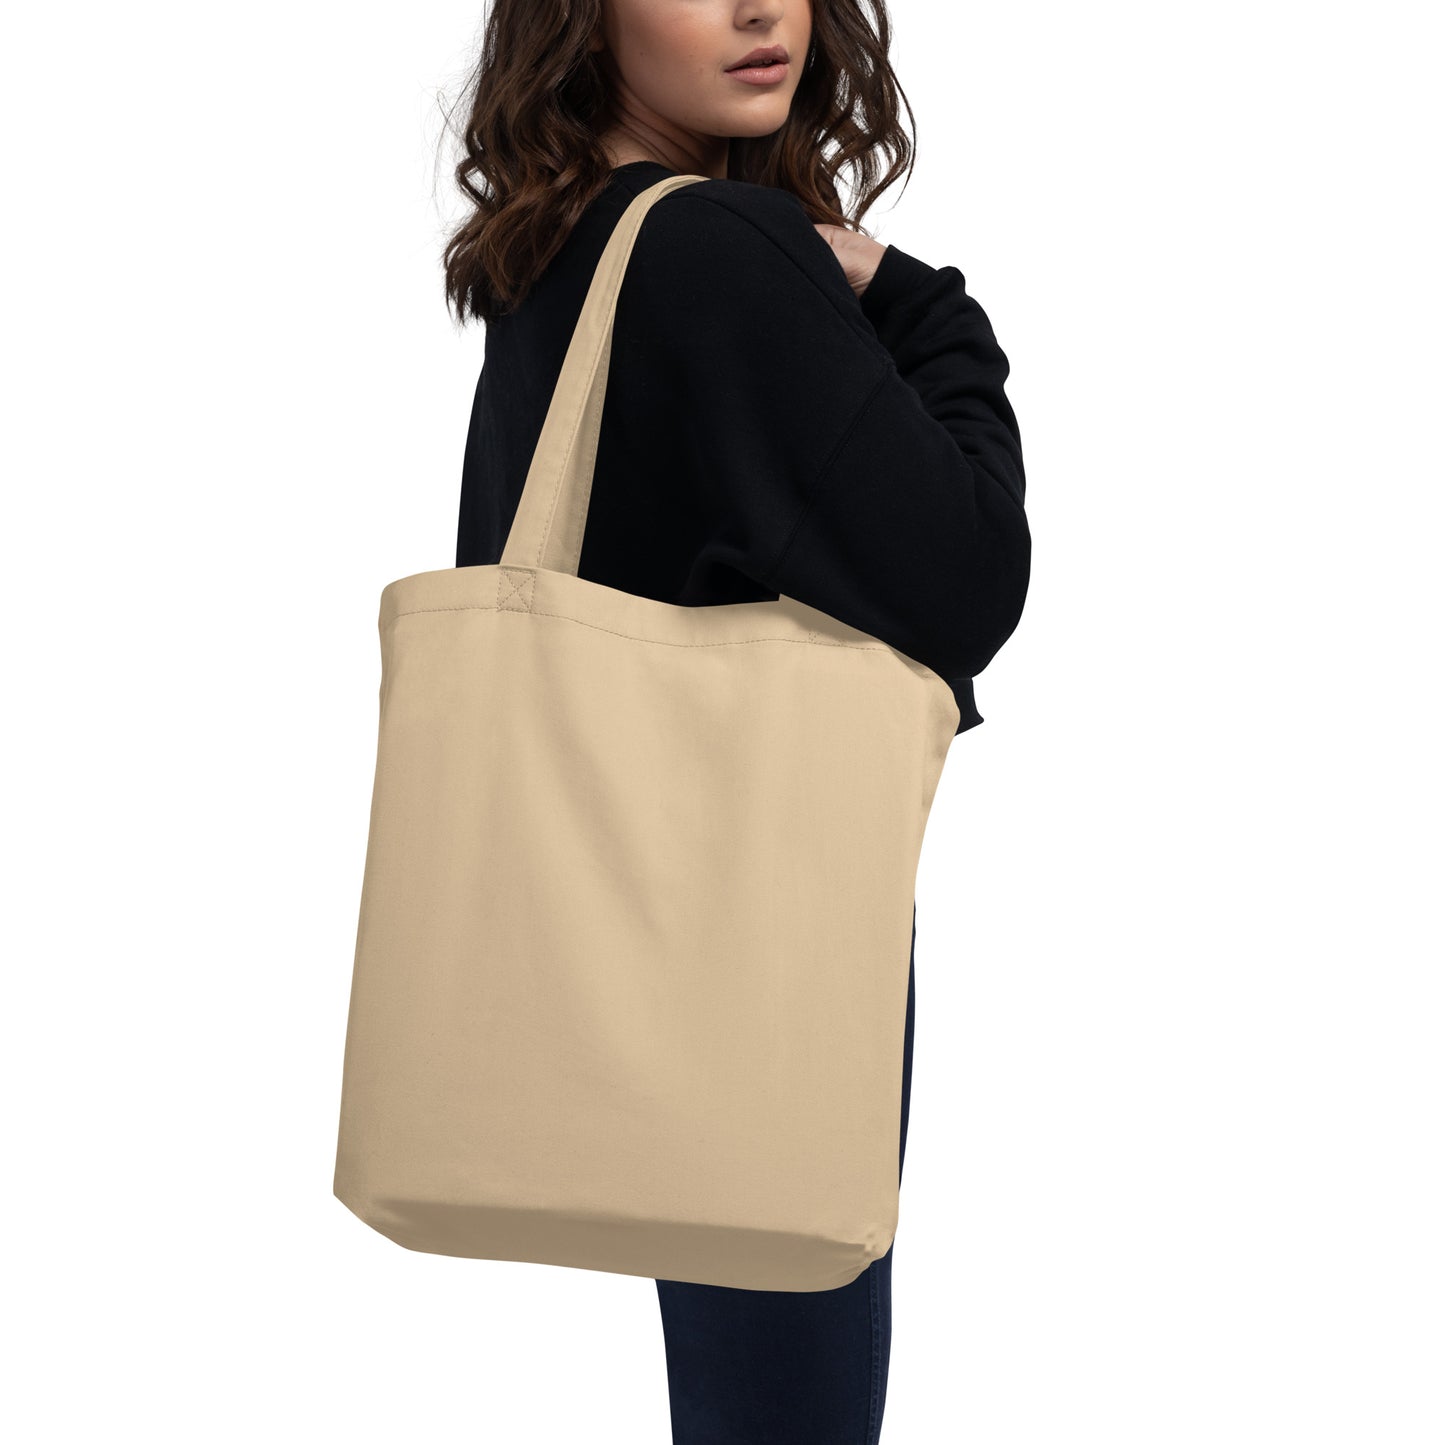 Aviation Gift Organic Tote - Black • MSY New Orleans • YHM Designs - Image 06